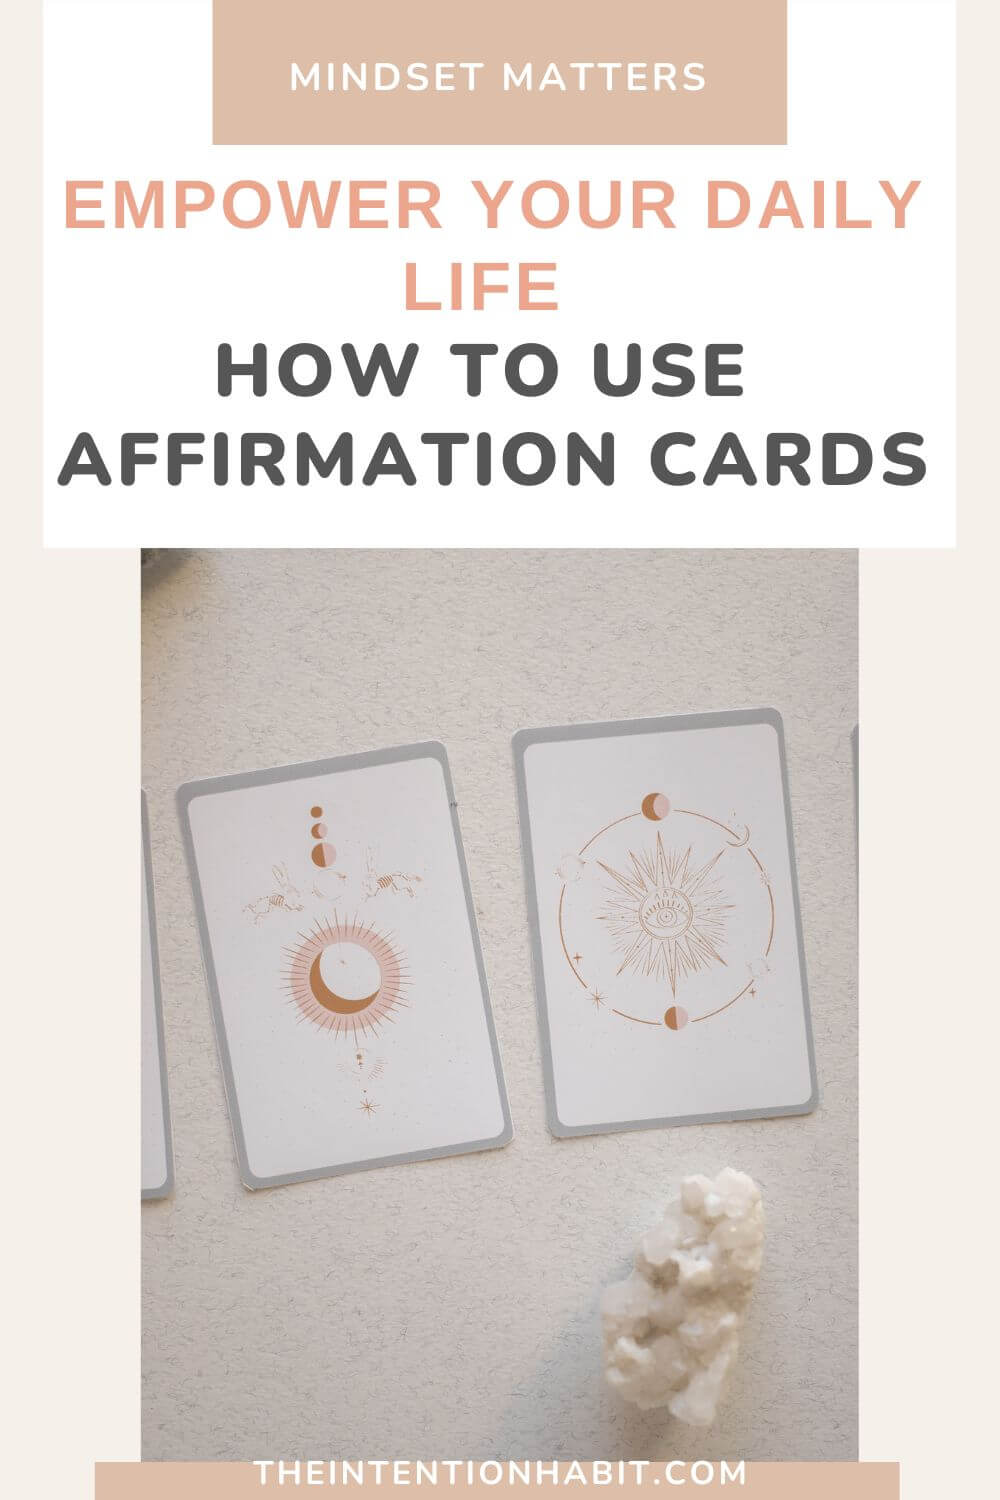 empower your daily life how to use affirmation cards.